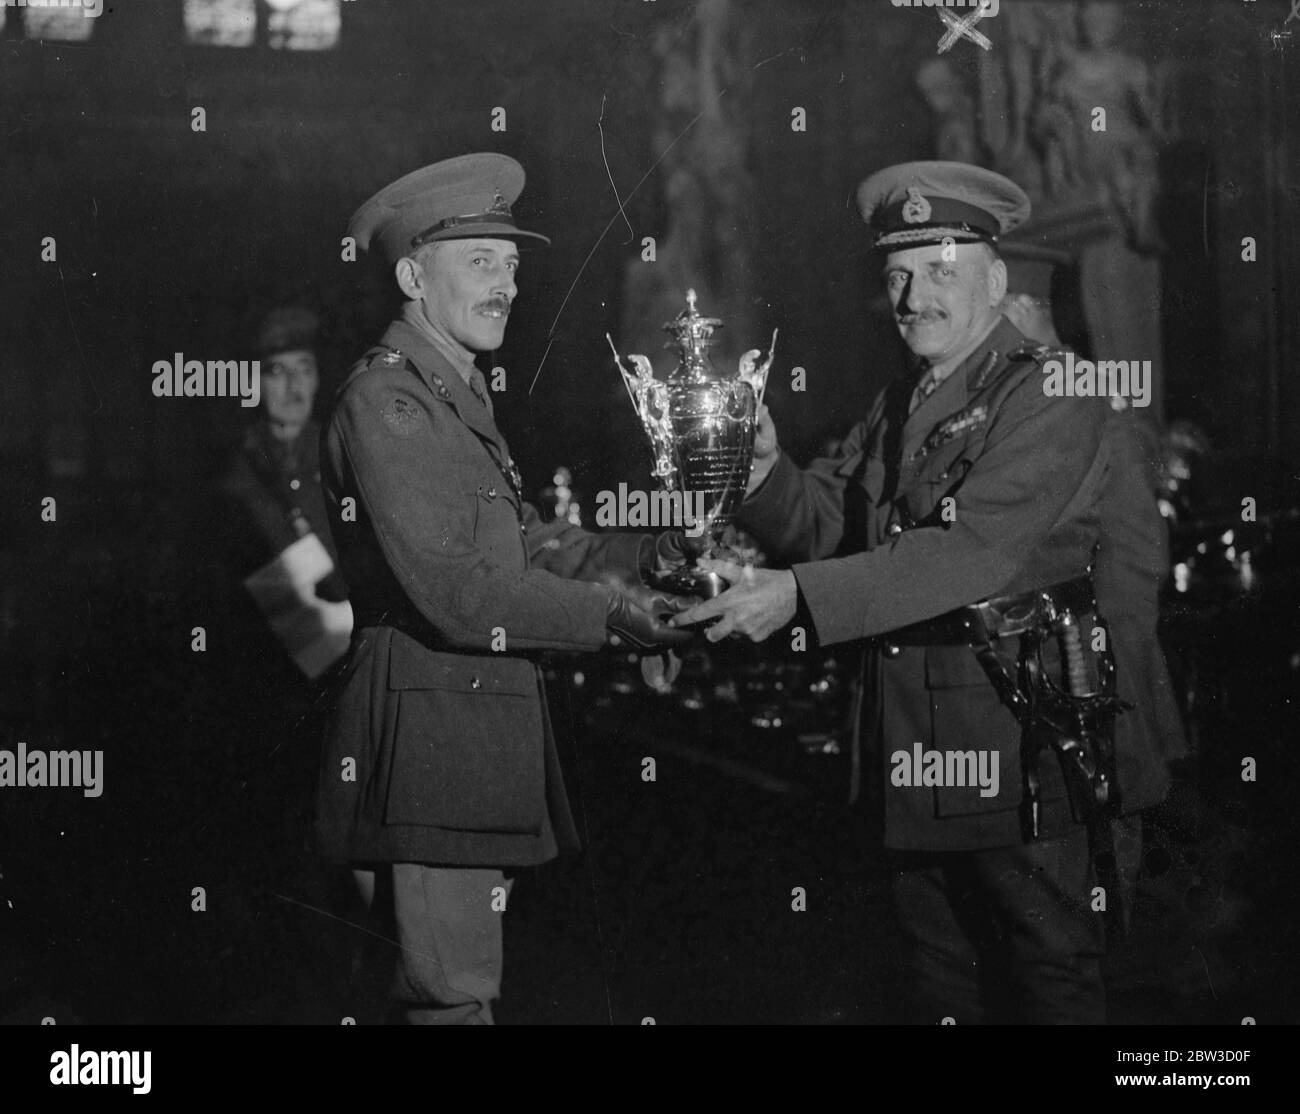 Adjutant General to the forces presents King 's Artillery Prize at the Guildhall . Lieut General Sir Harry W S Knox presenting the King 's Prize , won by 59th ( 4th West Lands ) Medium Brigade to the Commanding Officer , Lieut Col V R Cotton . 26 October 1935 Stock Photo